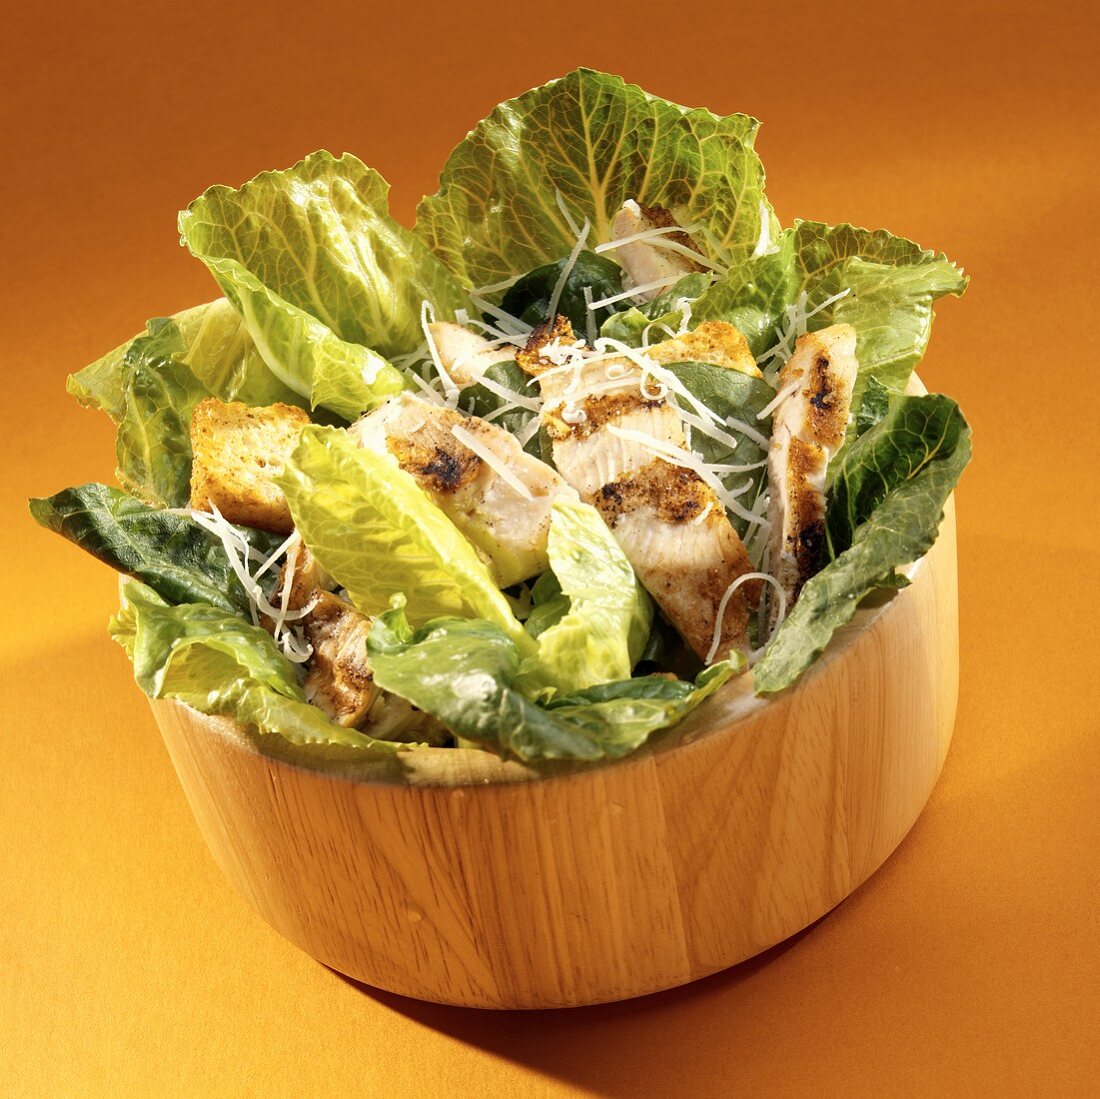 Caesar salad with chicken breast in wooden bowl